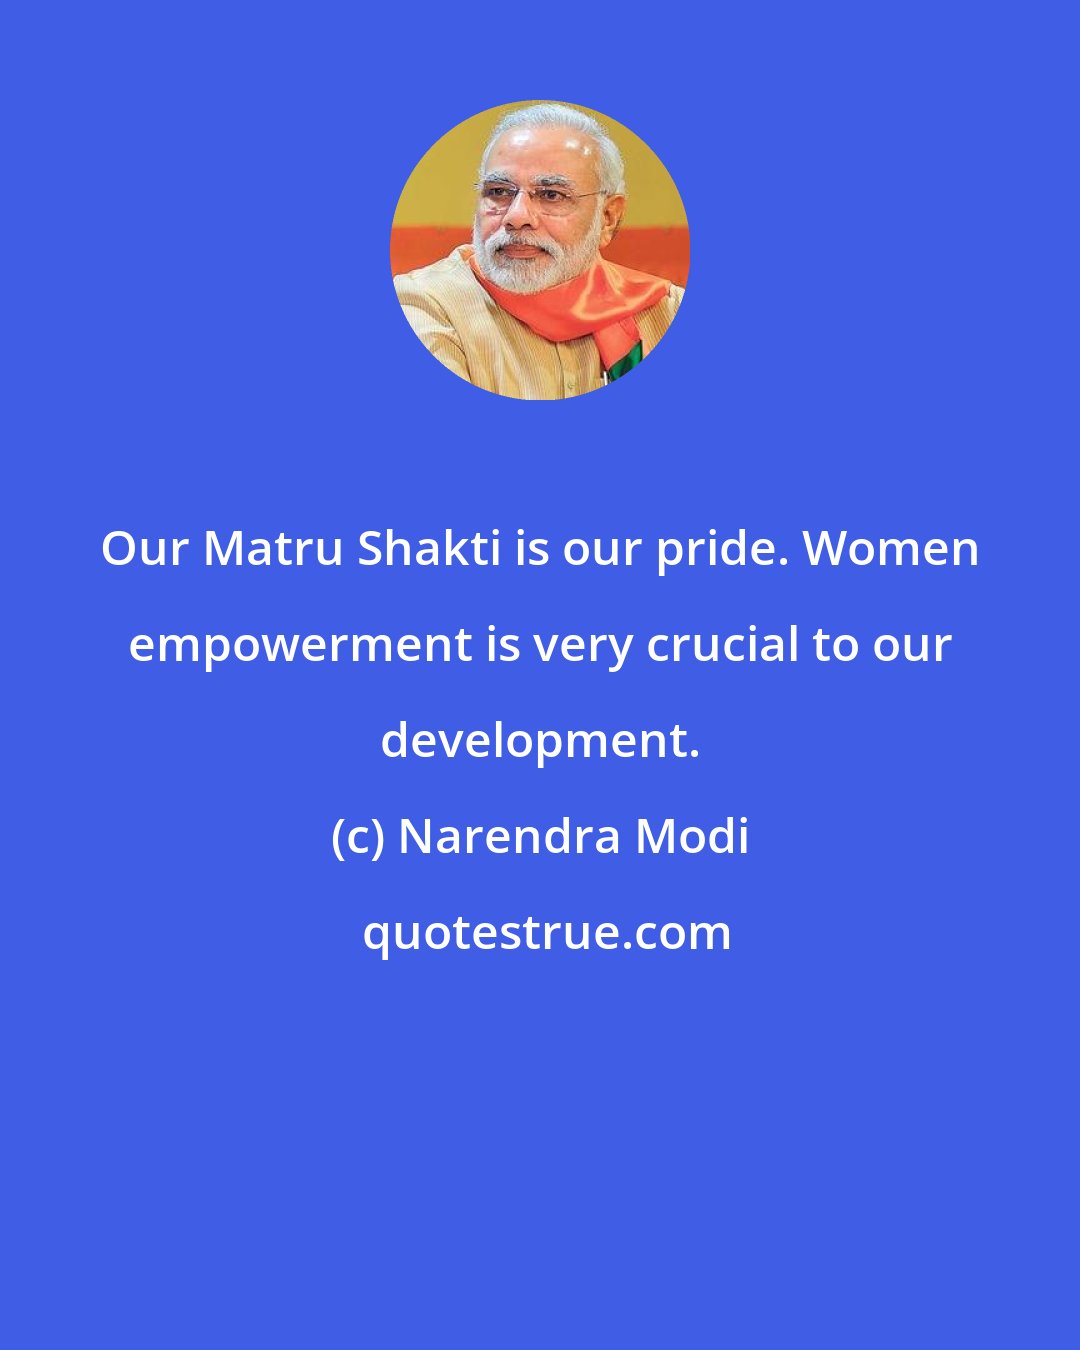 Narendra Modi: Our Matru Shakti is our pride. Women empowerment is very crucial to our development.